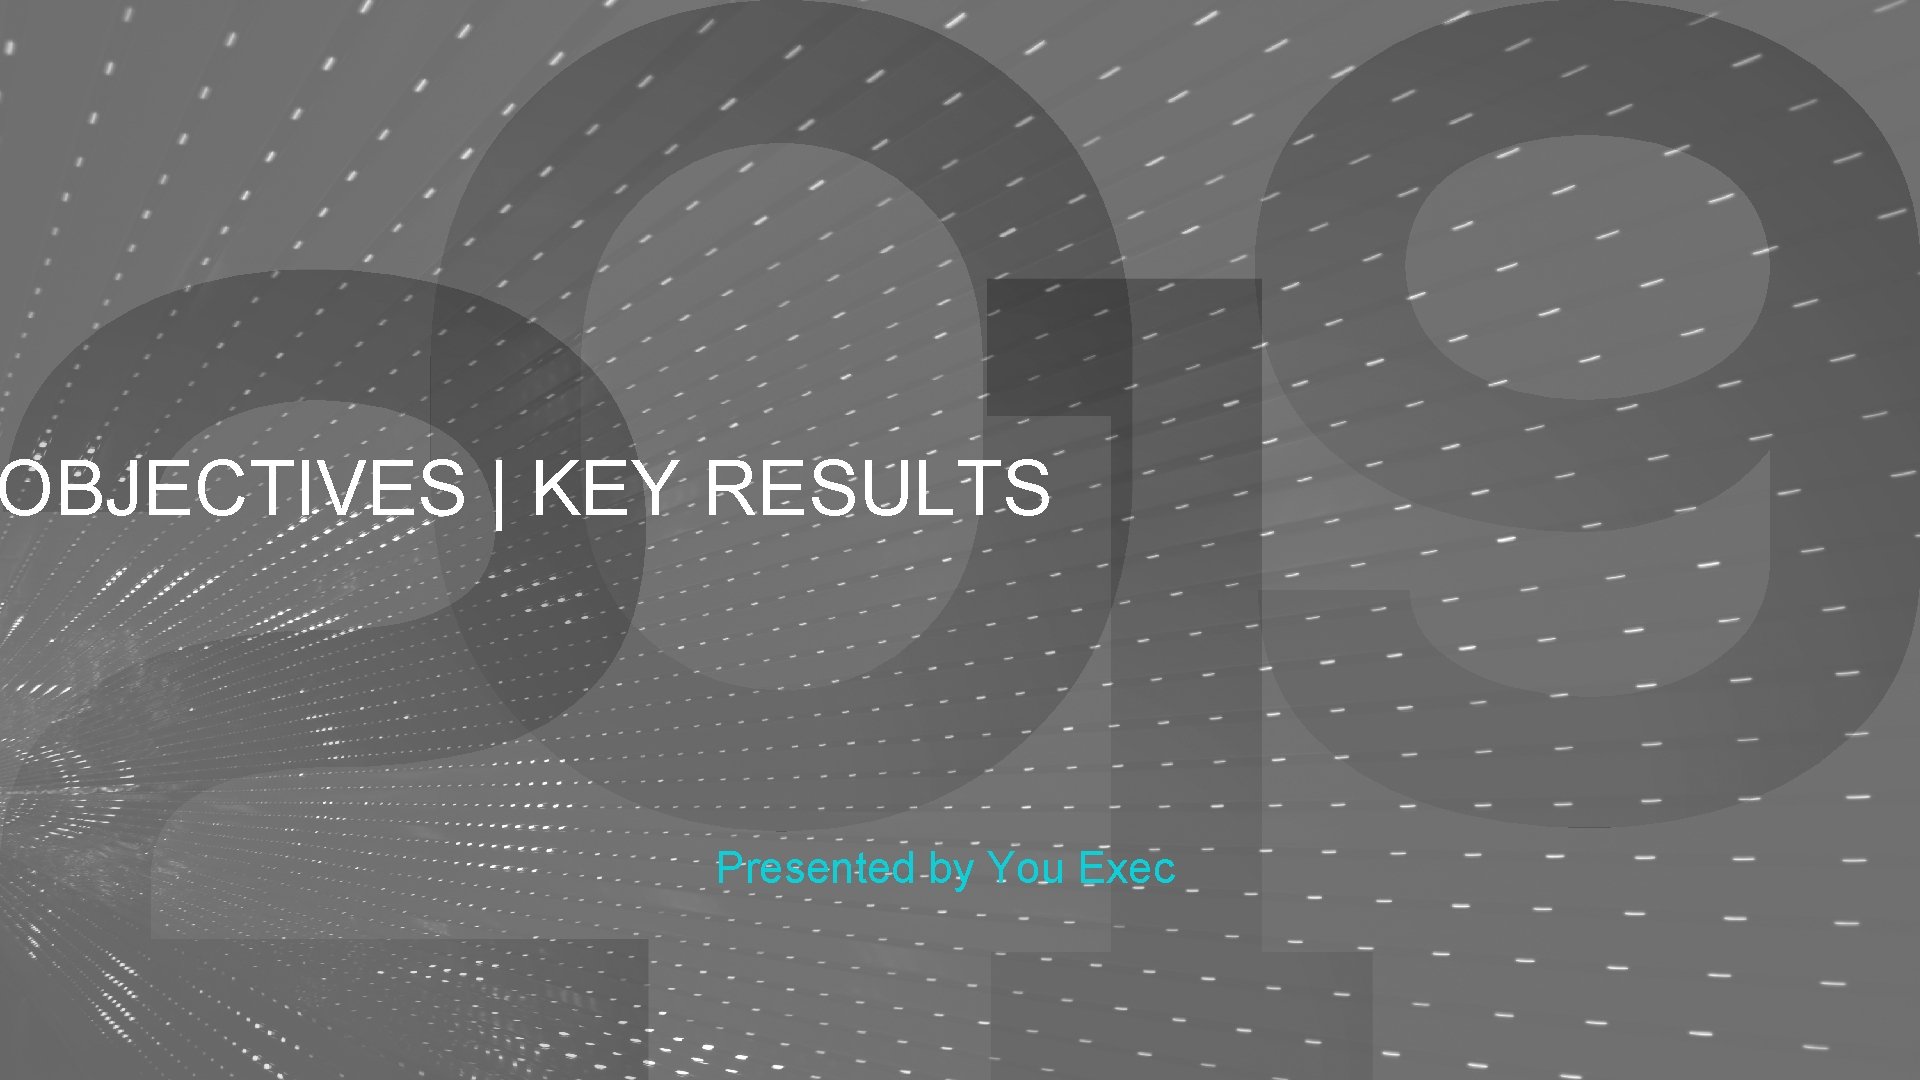 OBJECTIVES | KEY RESULTS Presented by You Exec 